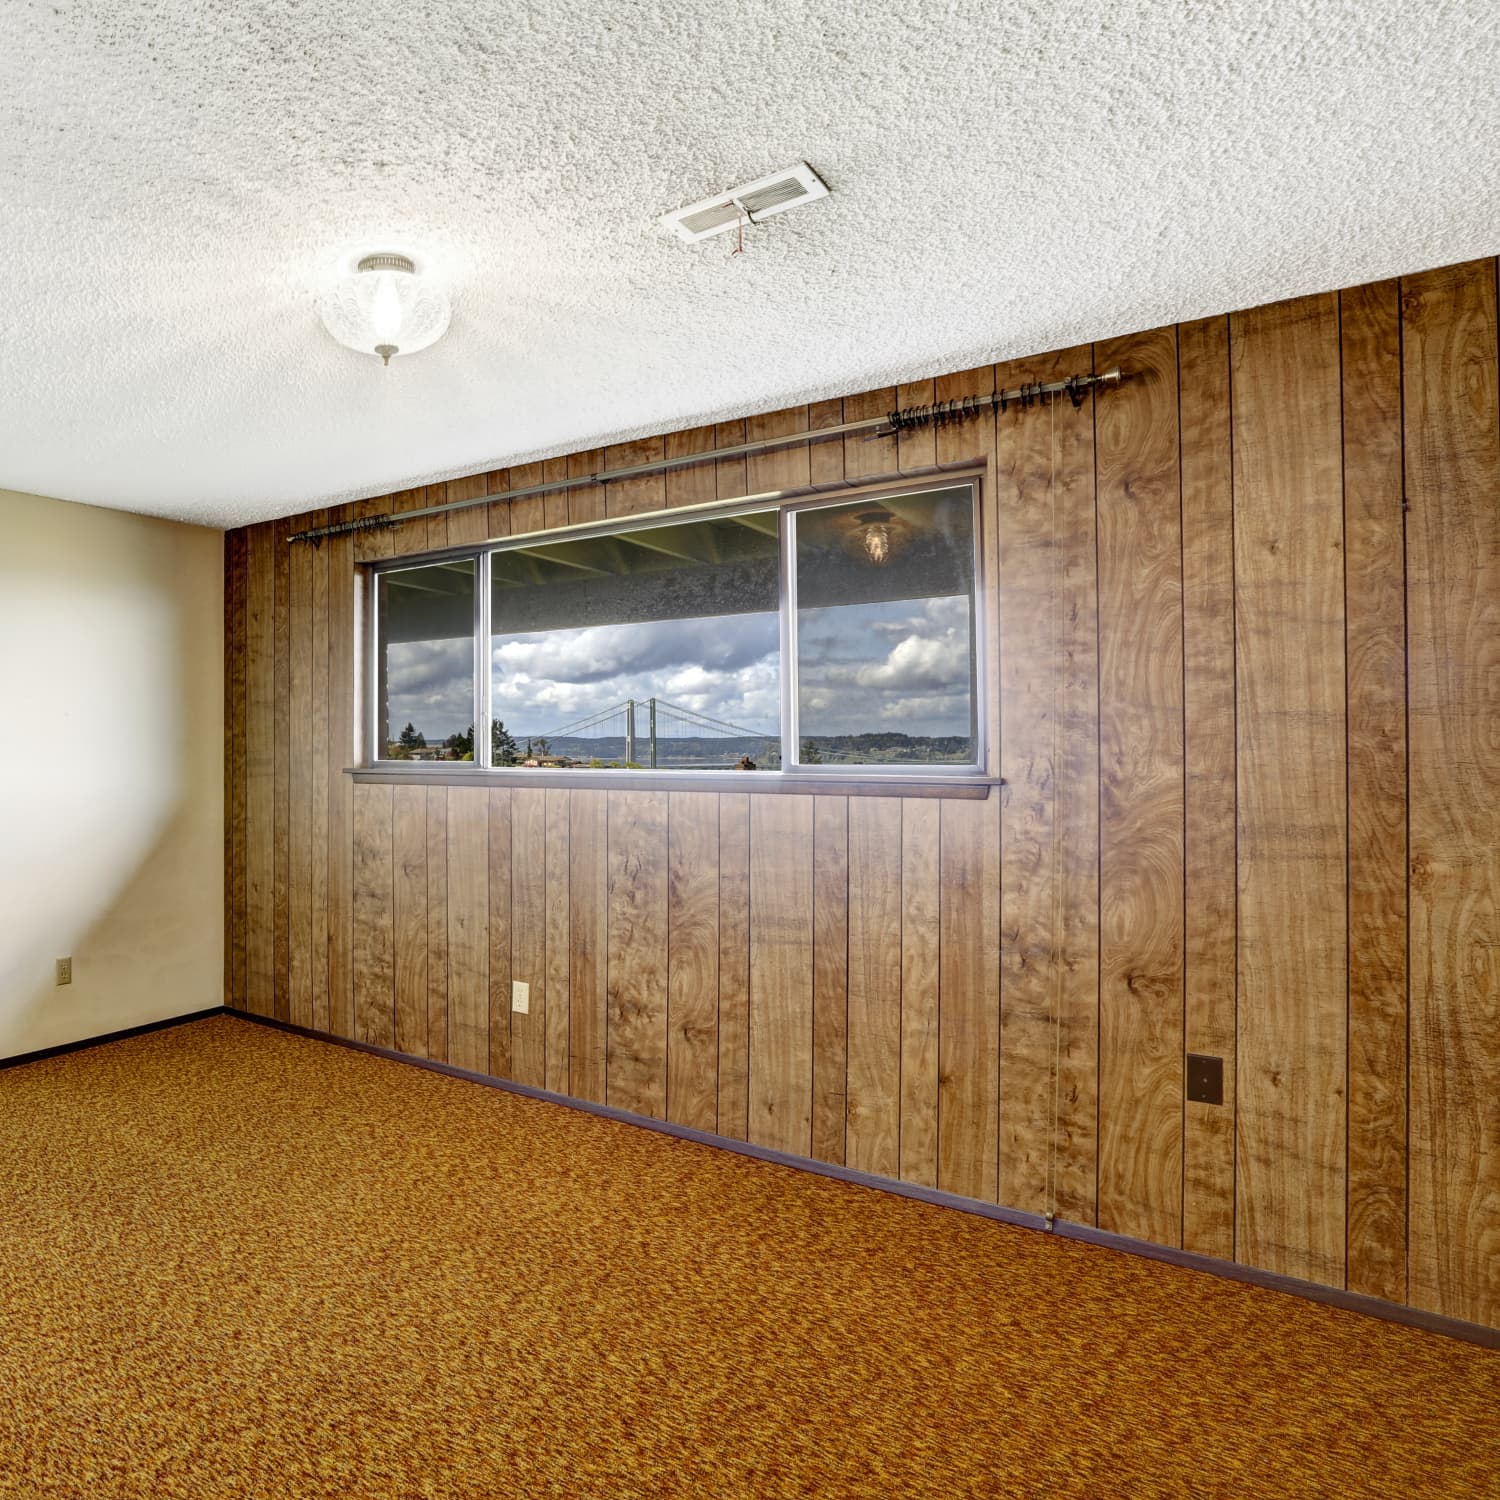 How to Clean Wood Wall Paneling